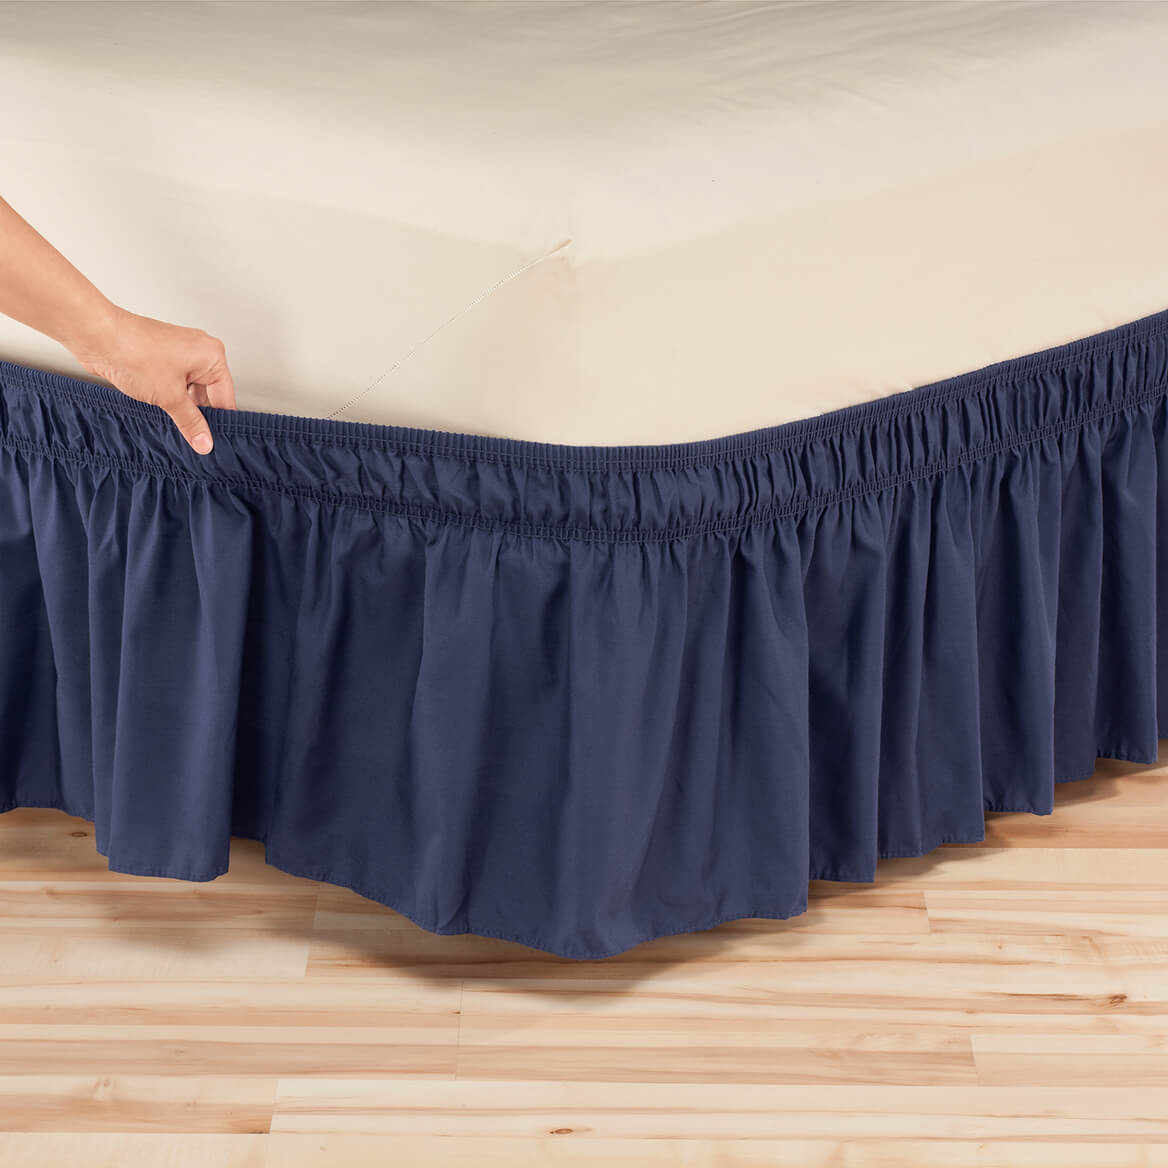 Solid Wrap Around Elastic Bed Skirt - Miles Kimball serapportantà Wrap Around Bed Skirt